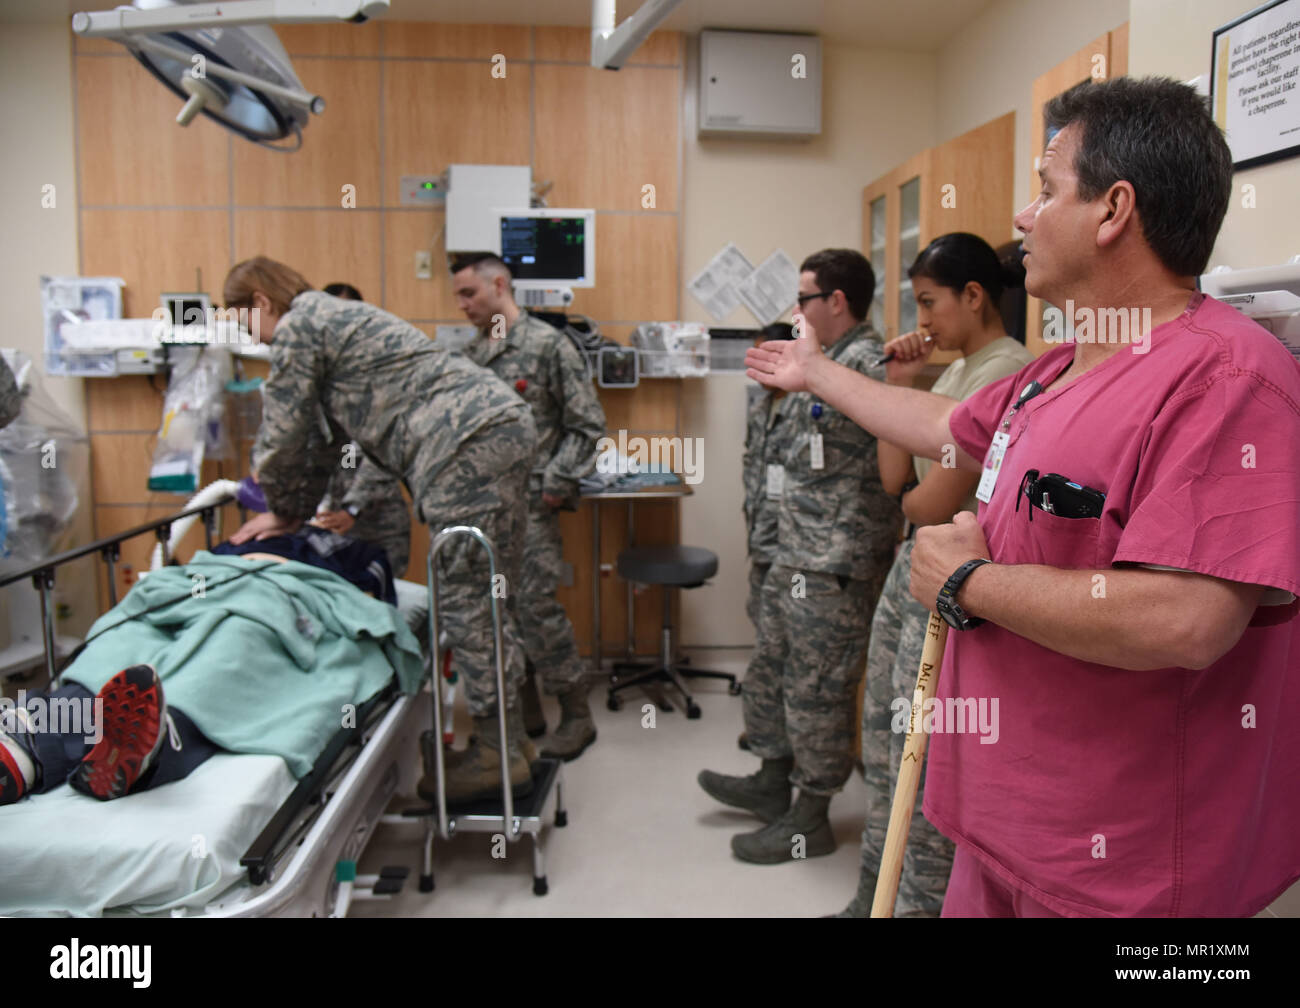 Dale Rowell, 81st Medical Operations Squadron charge nurse, instructs staff members as they participate in a medical emergency scenario during Code Blue Thursday in the Keesler Medical Center emergency room April 27, 2017, on Keesler Air Force Base, Miss. Emergency room staff members coordinated with the simulation lab to use human patient simulators for running various advanced cardiac life support scenarios to improve Keesler’s new medical technicians’ skills and get them familiar with emergency equipment. (U.S. Air Force photo by Kemberly Groue) Stock Photo